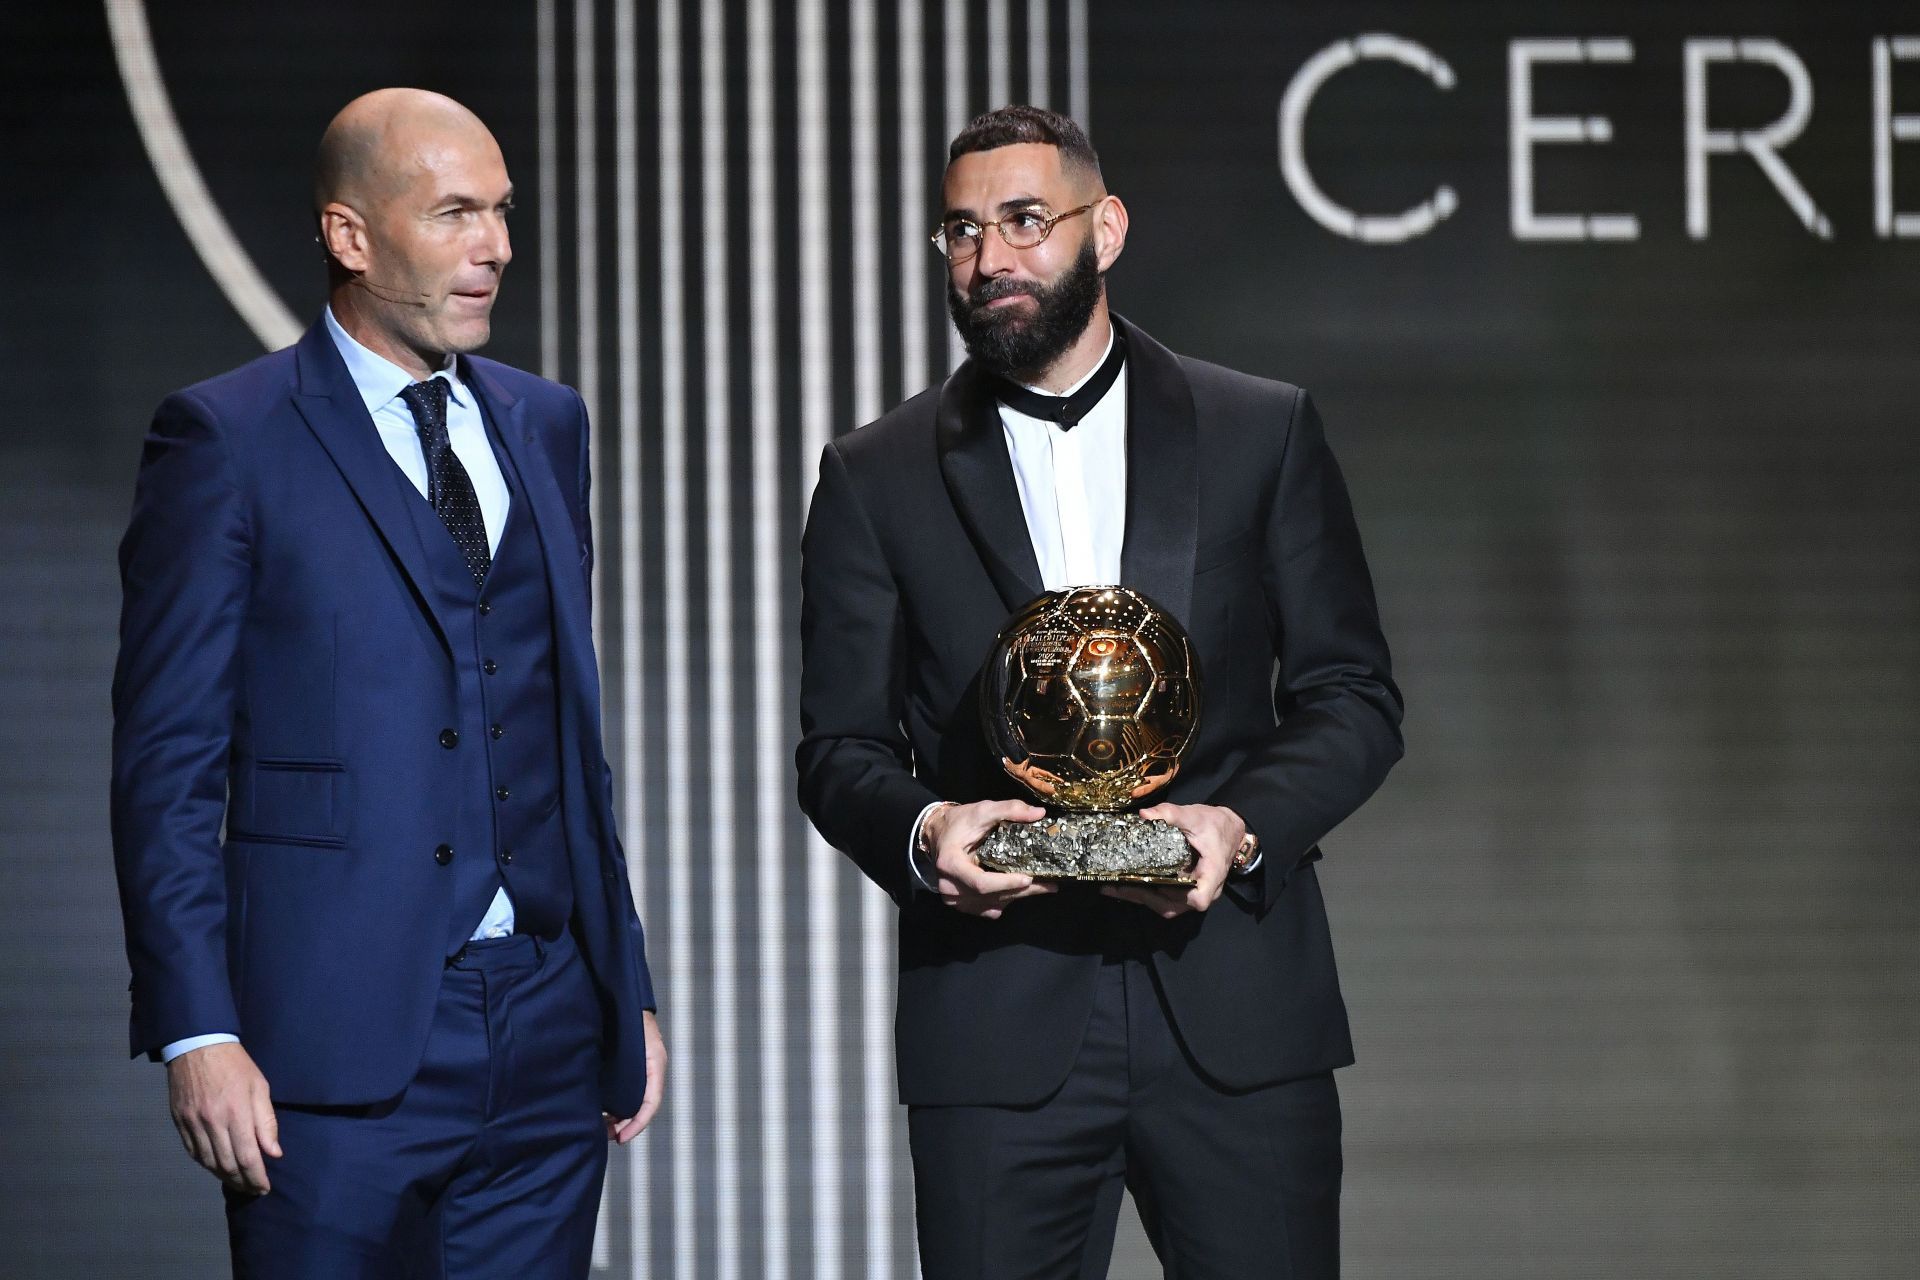 Karim Benzema was awarded the coveted award on Monday.